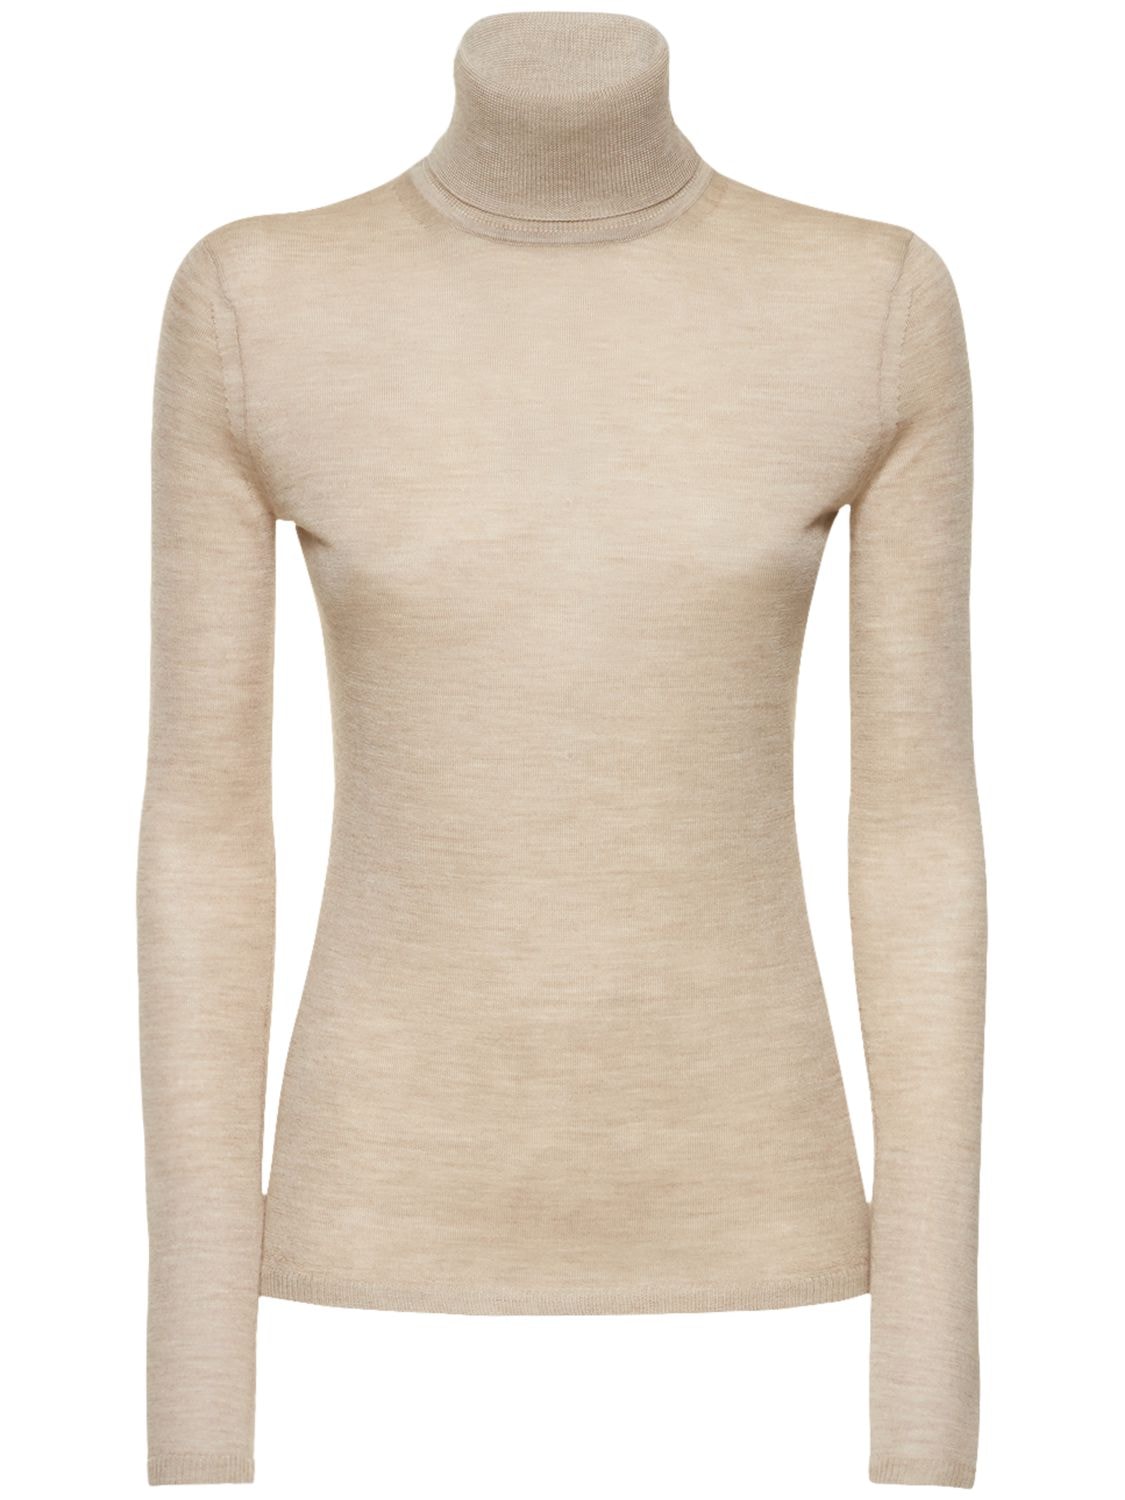 Image of Costa Cashmere & Silk Knit Sweater